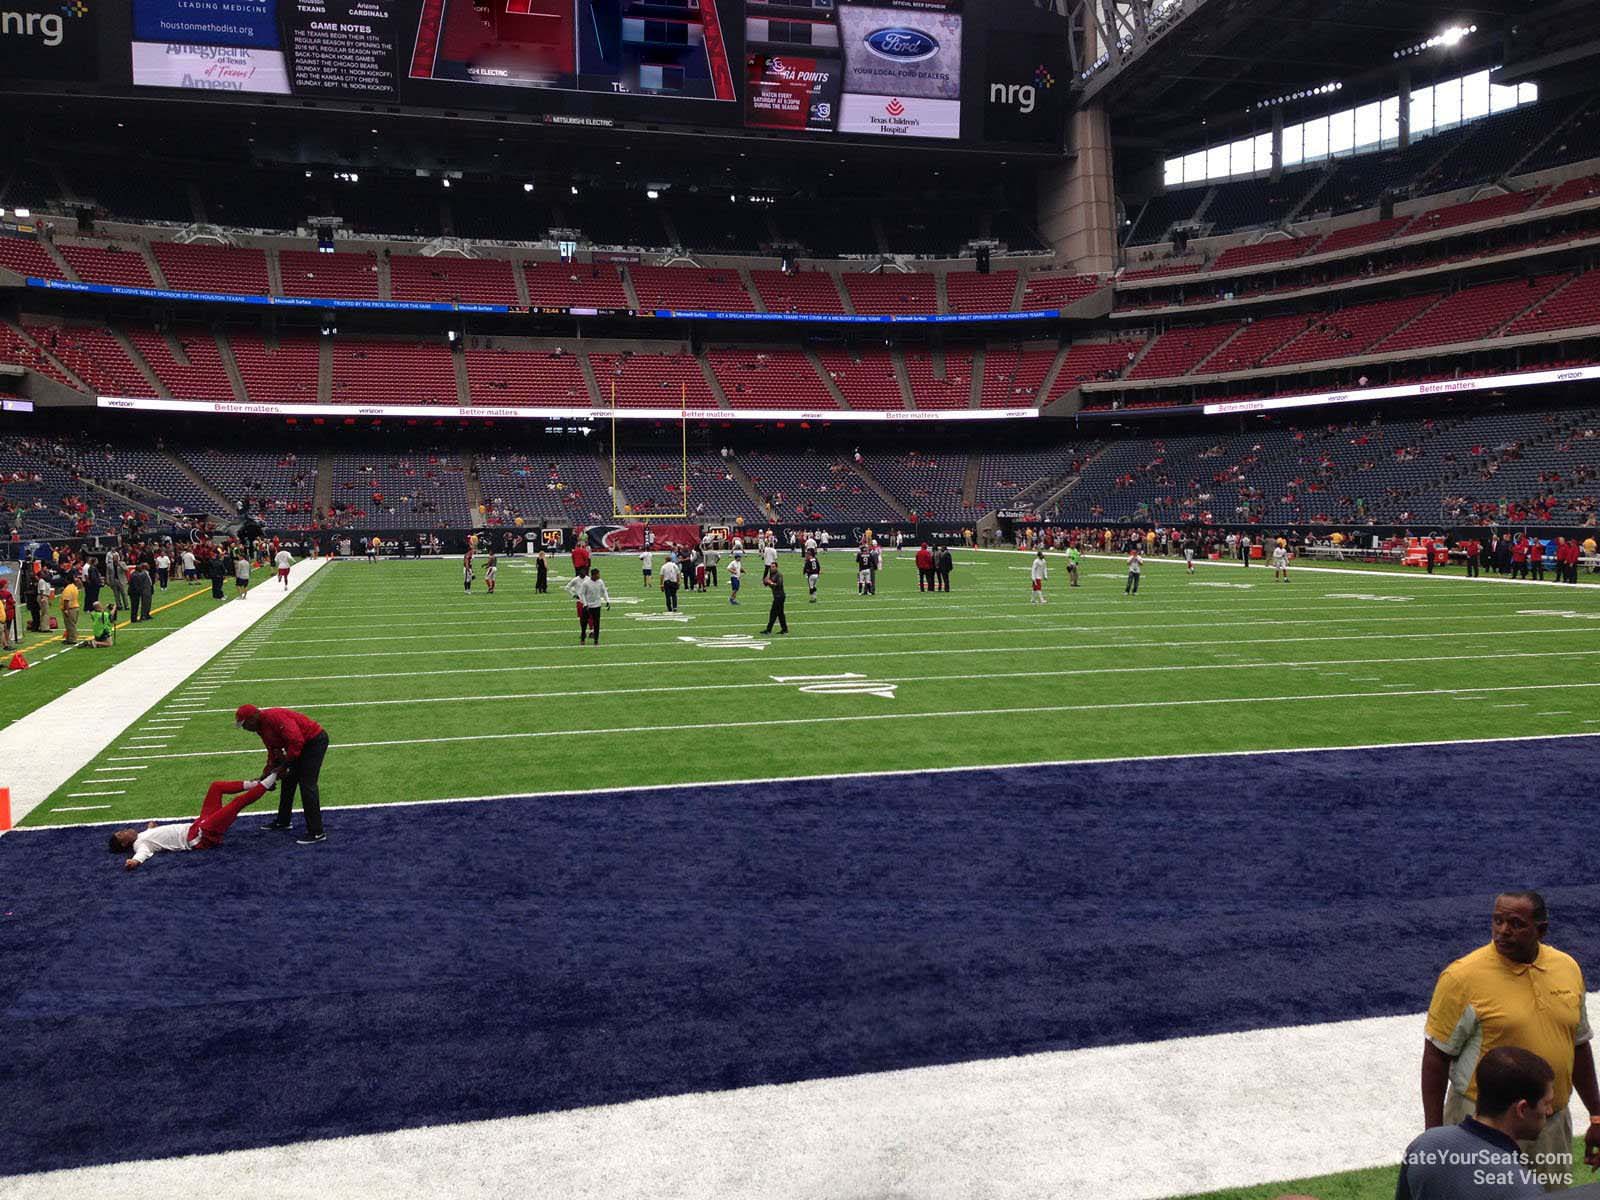 section 138, row c seat view  for football - nrg stadium